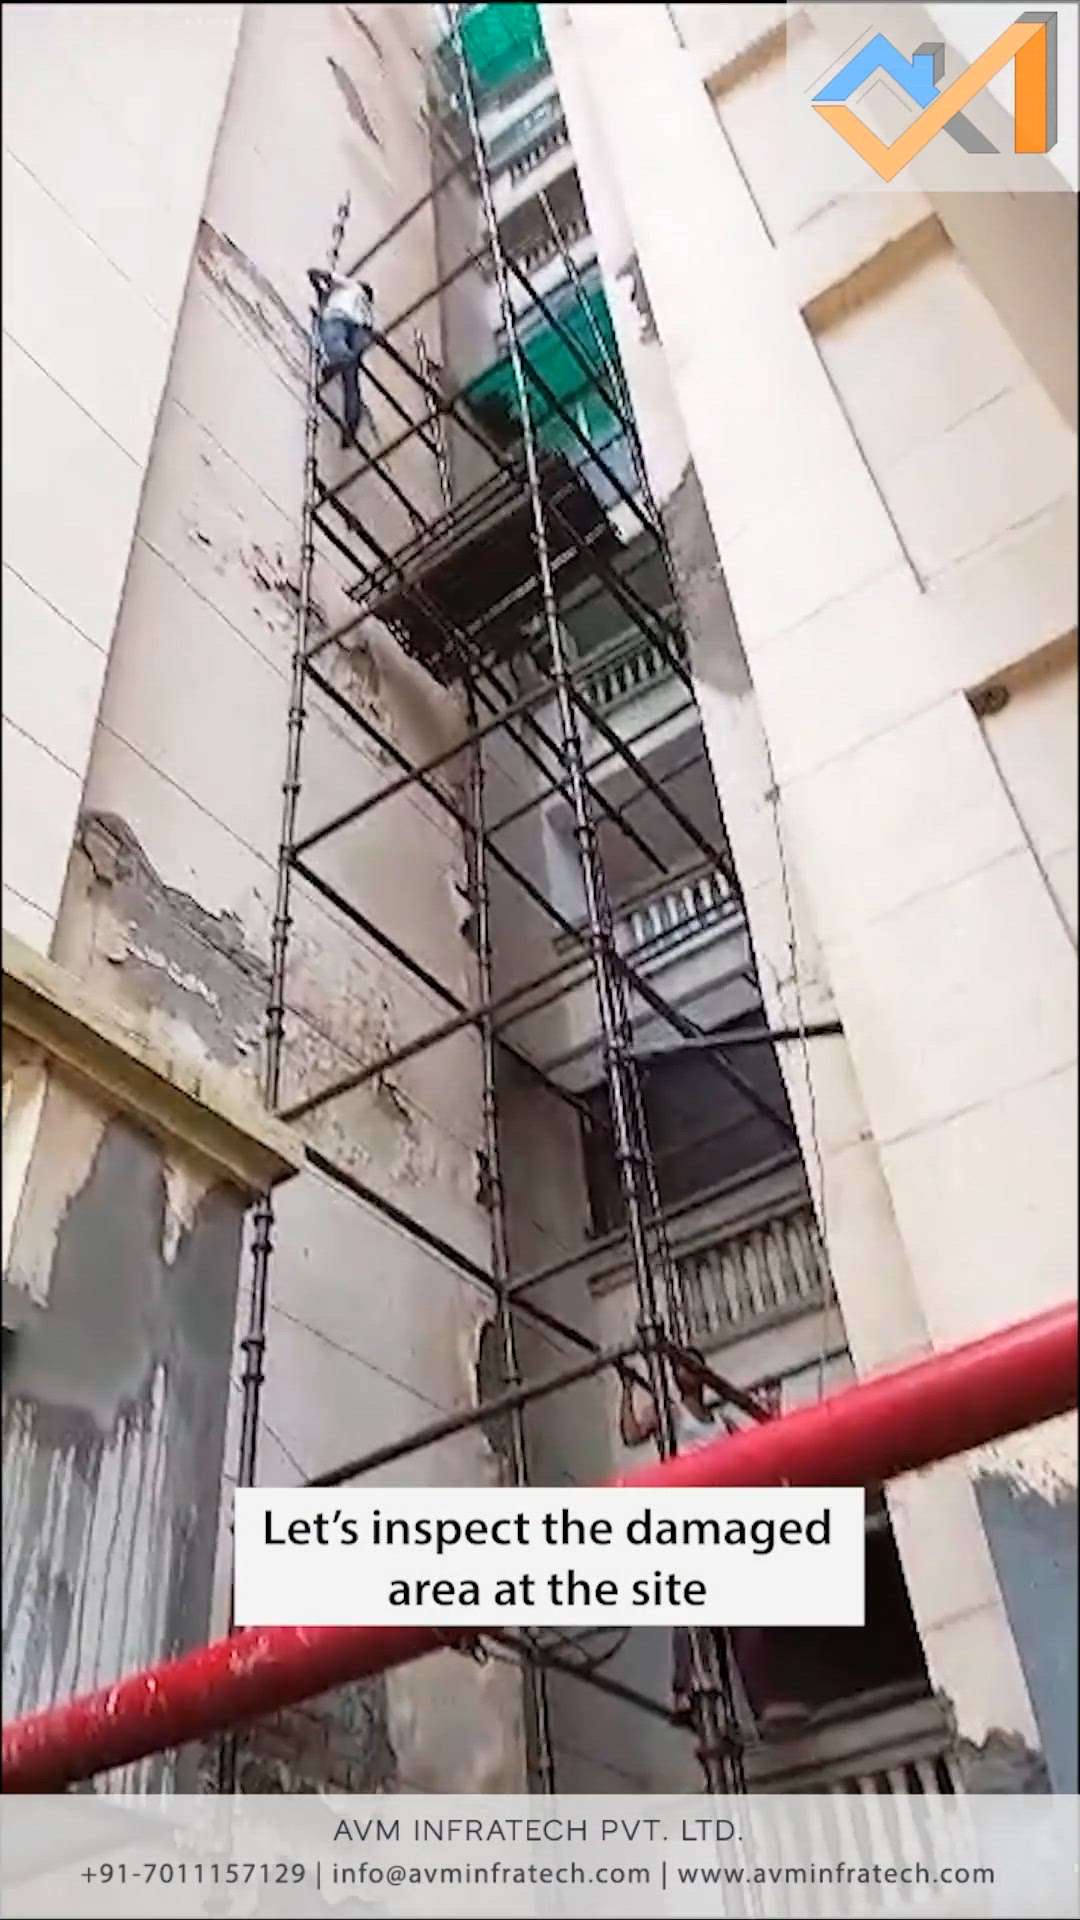 Building façade repair/retrofitting works in high rise towers.


Follow us for more such amazing updates. 
.
.
#society #dwarka #dwarkadelhi #dwarkaexpressway #final #finaloutput #output #result #results #retrofittingbuildings #tower #towers #avminfratech #civilengineering #civilengineer #civilconstruction #civilwork #work #repairwork #measurement #constructionsite